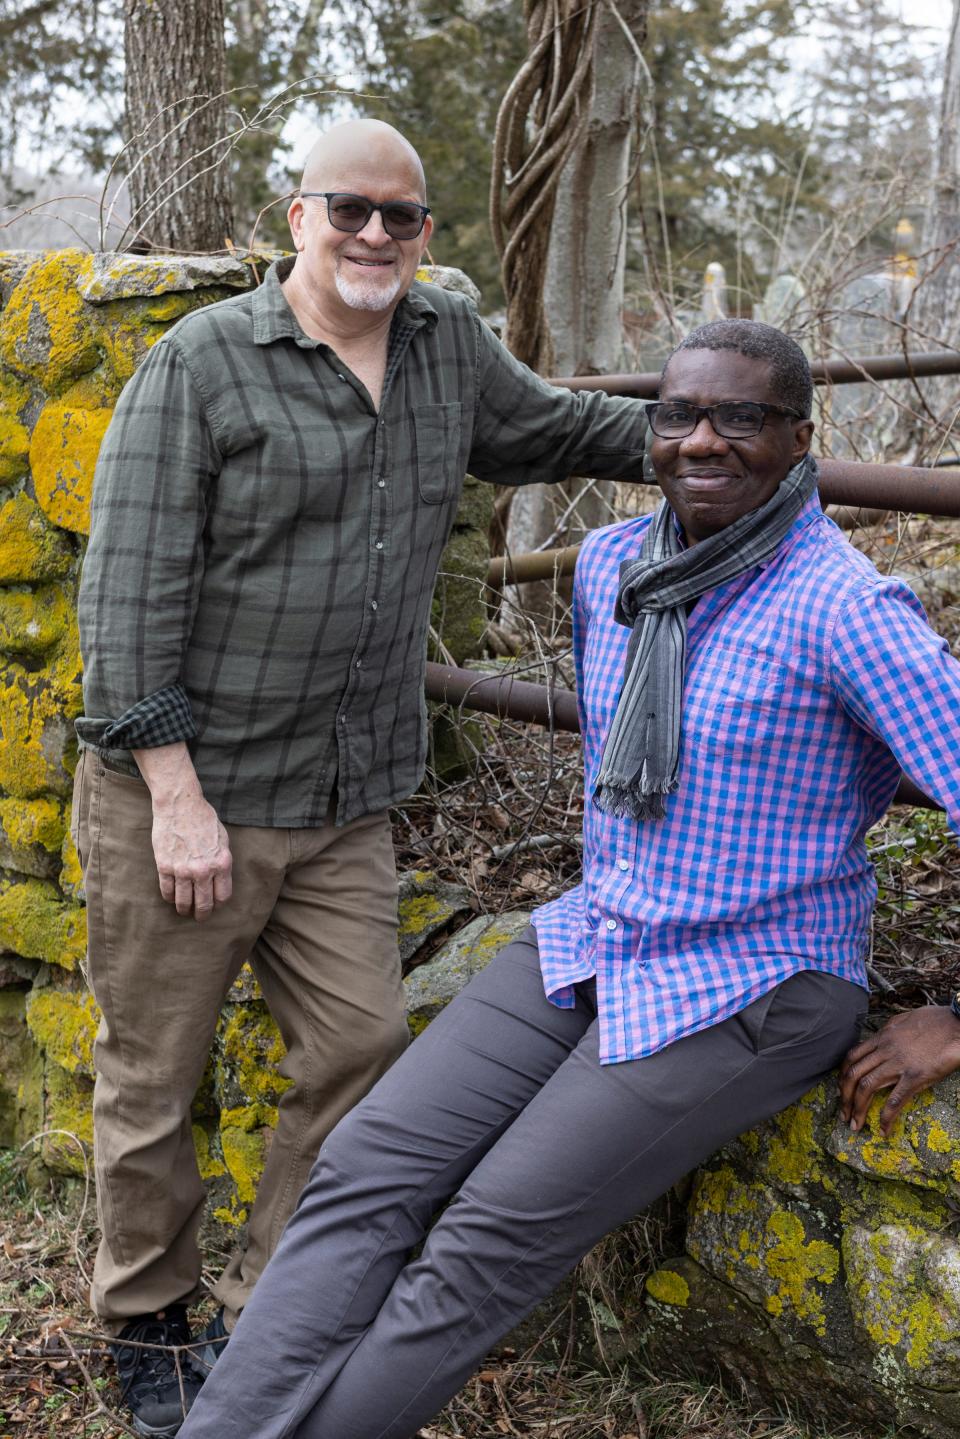 Artists Richard Neal, left, and Frank Anigbo will talk Nov. 3 about pairing their visions for the "Fragile" exhibit on racism at the Cape Cod Museum of Art.